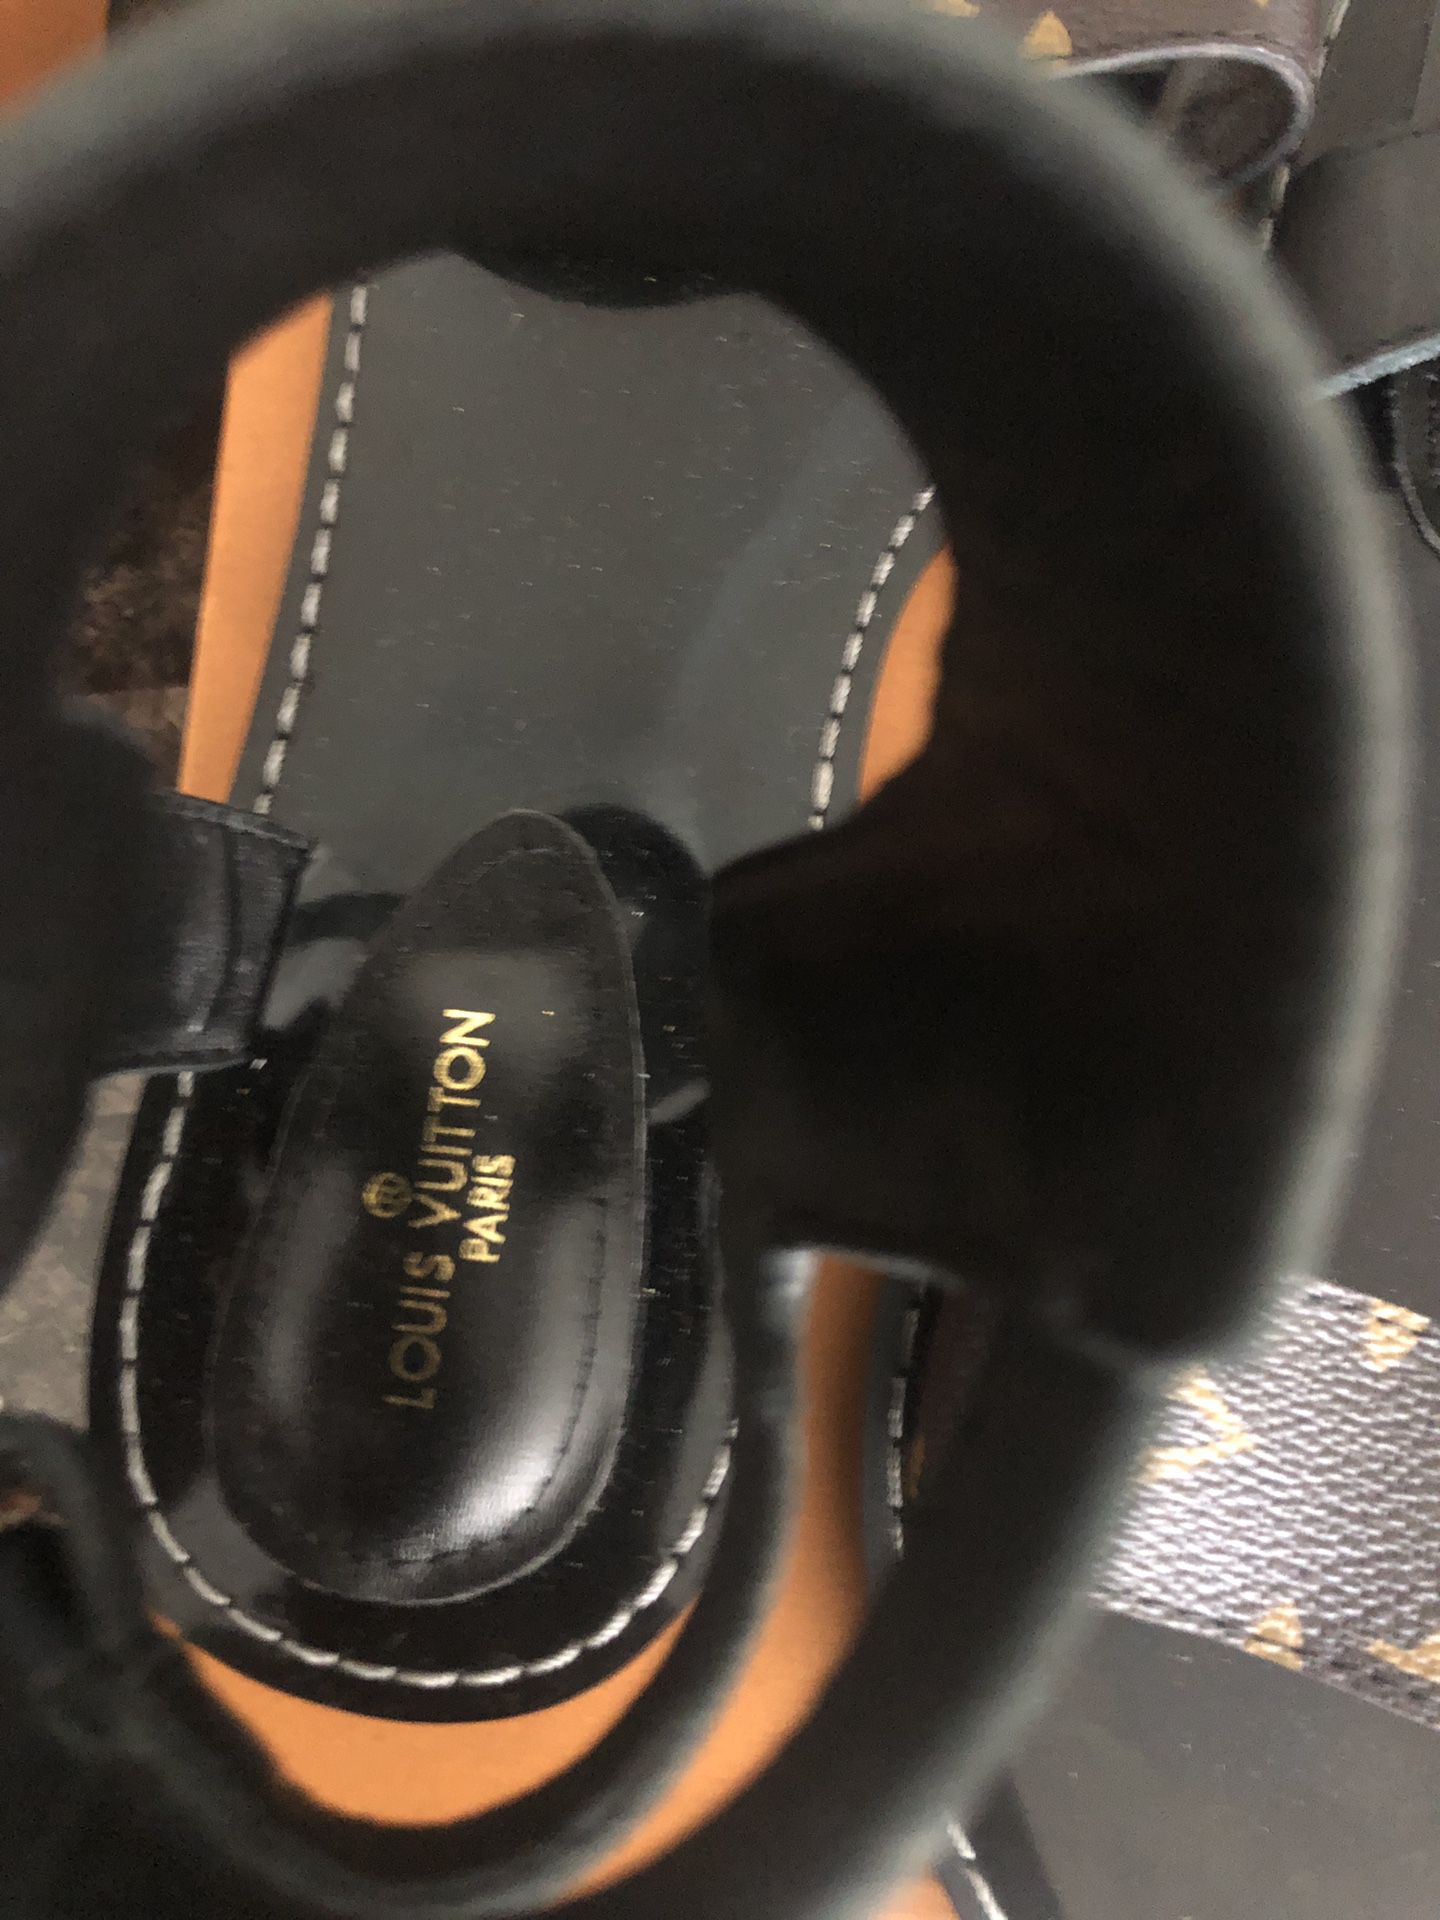 Louis Vuitton nomad sandals for Sale in Johns Creek, GA - OfferUp